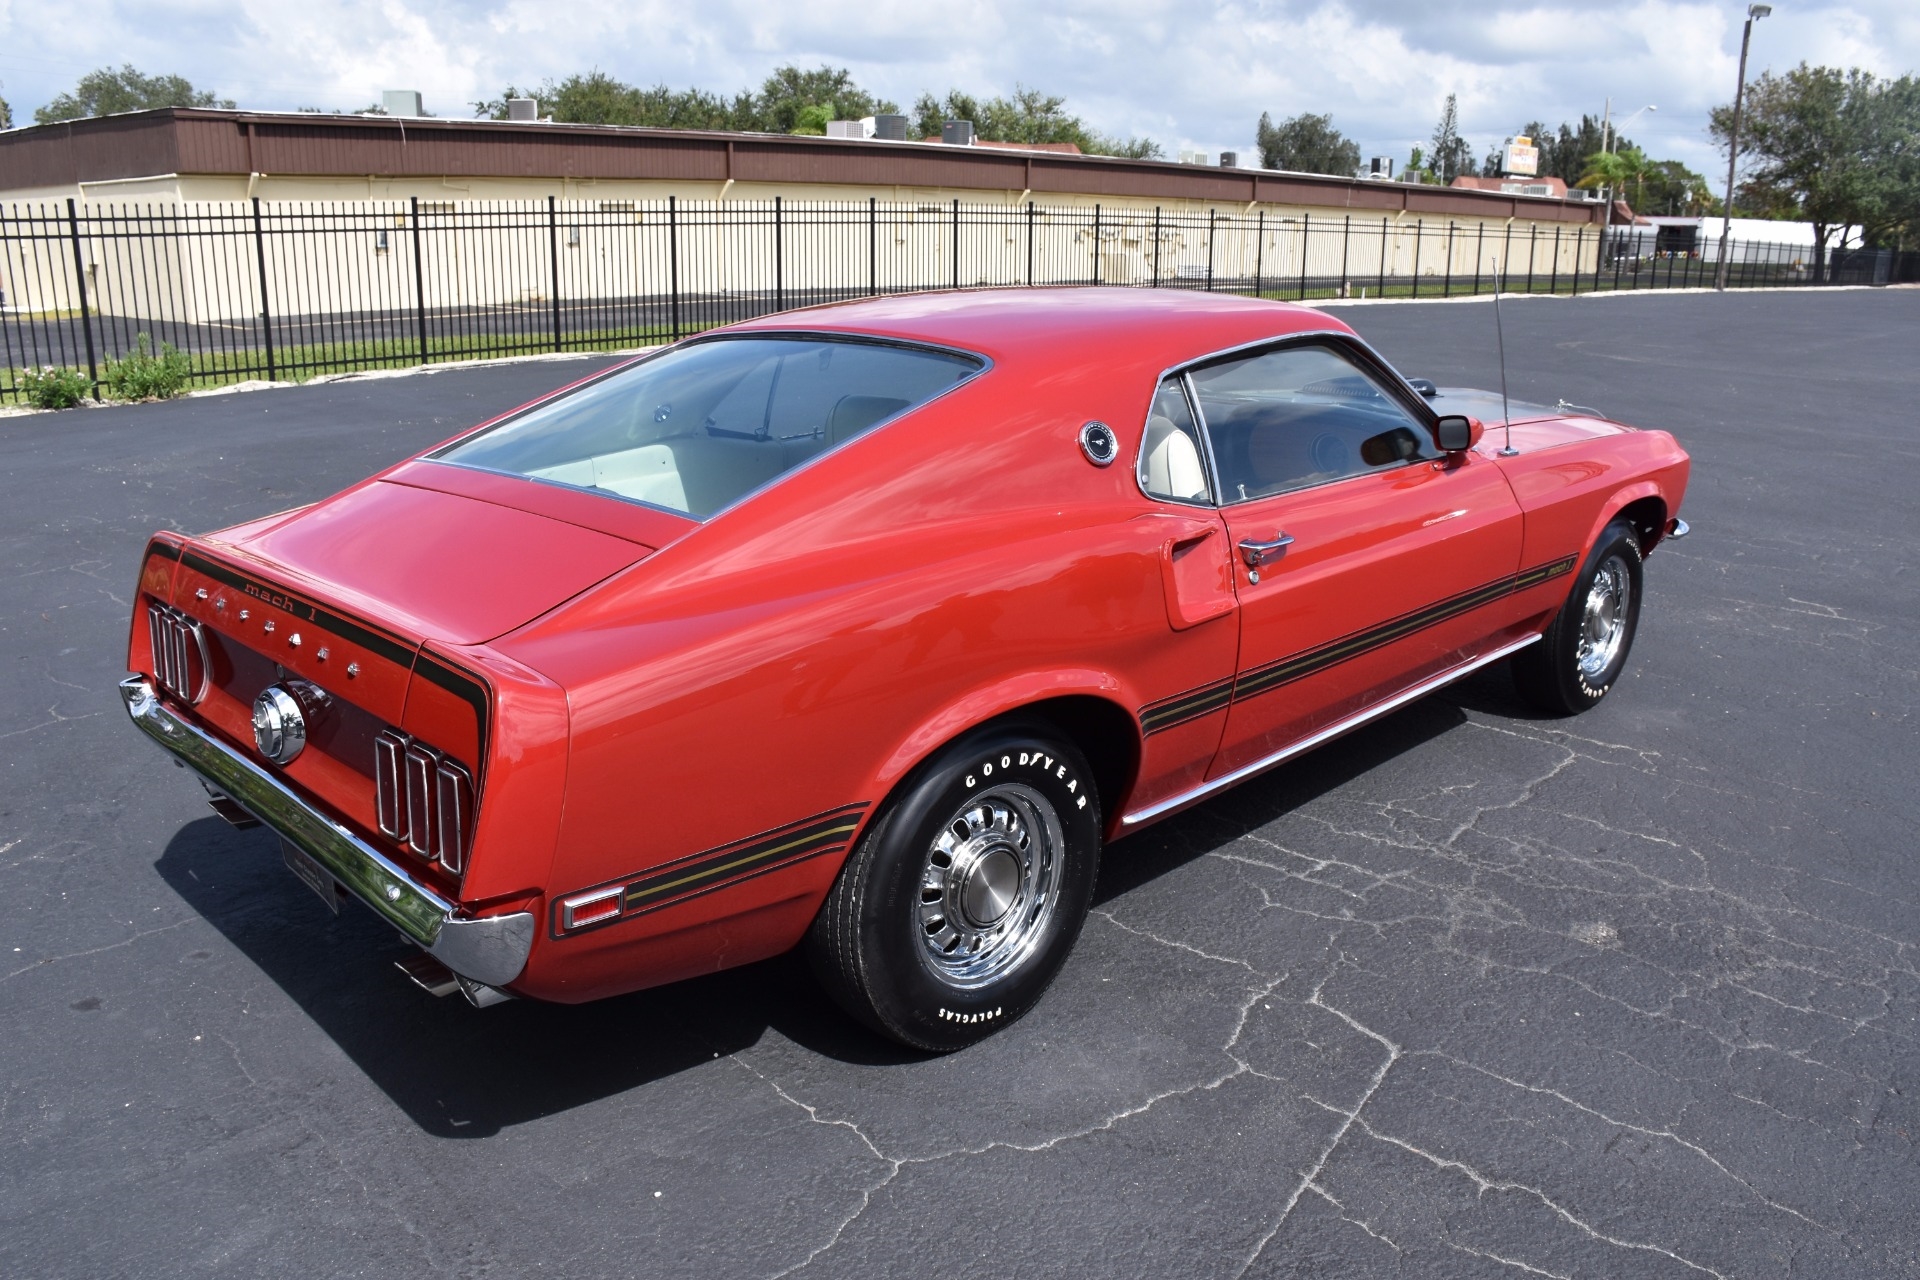 1969 Ford Mustang Mach 1 - 428 Cobra Jet 0 Candy Apple Red Coupe 428C.I